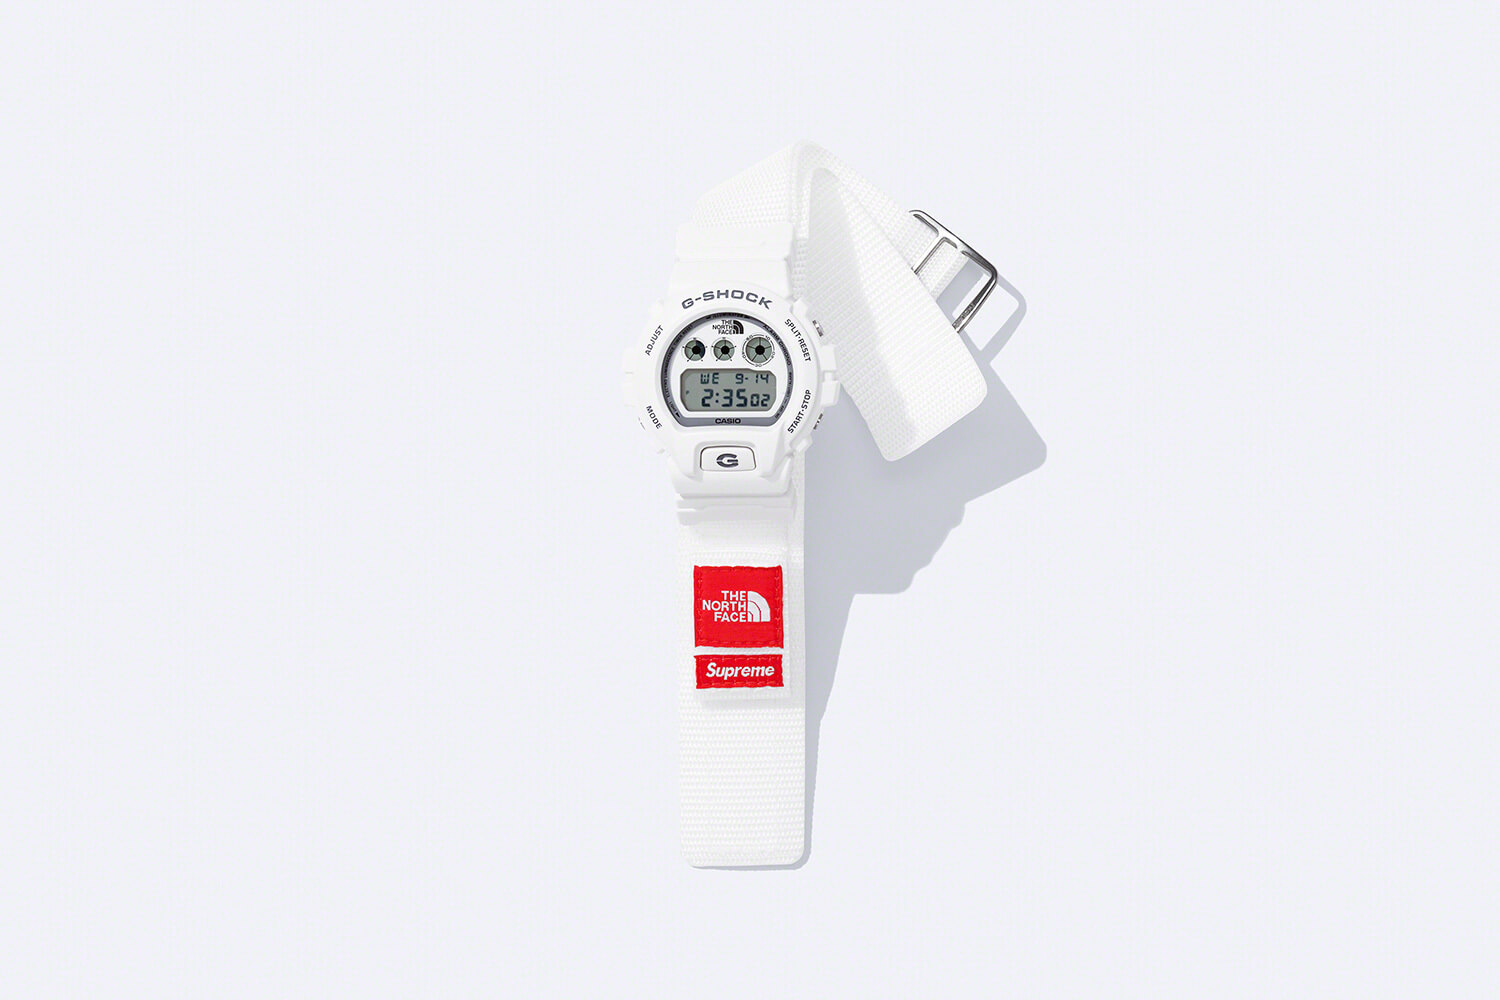 Supreme the north face gshock文字盤の色ブラック系